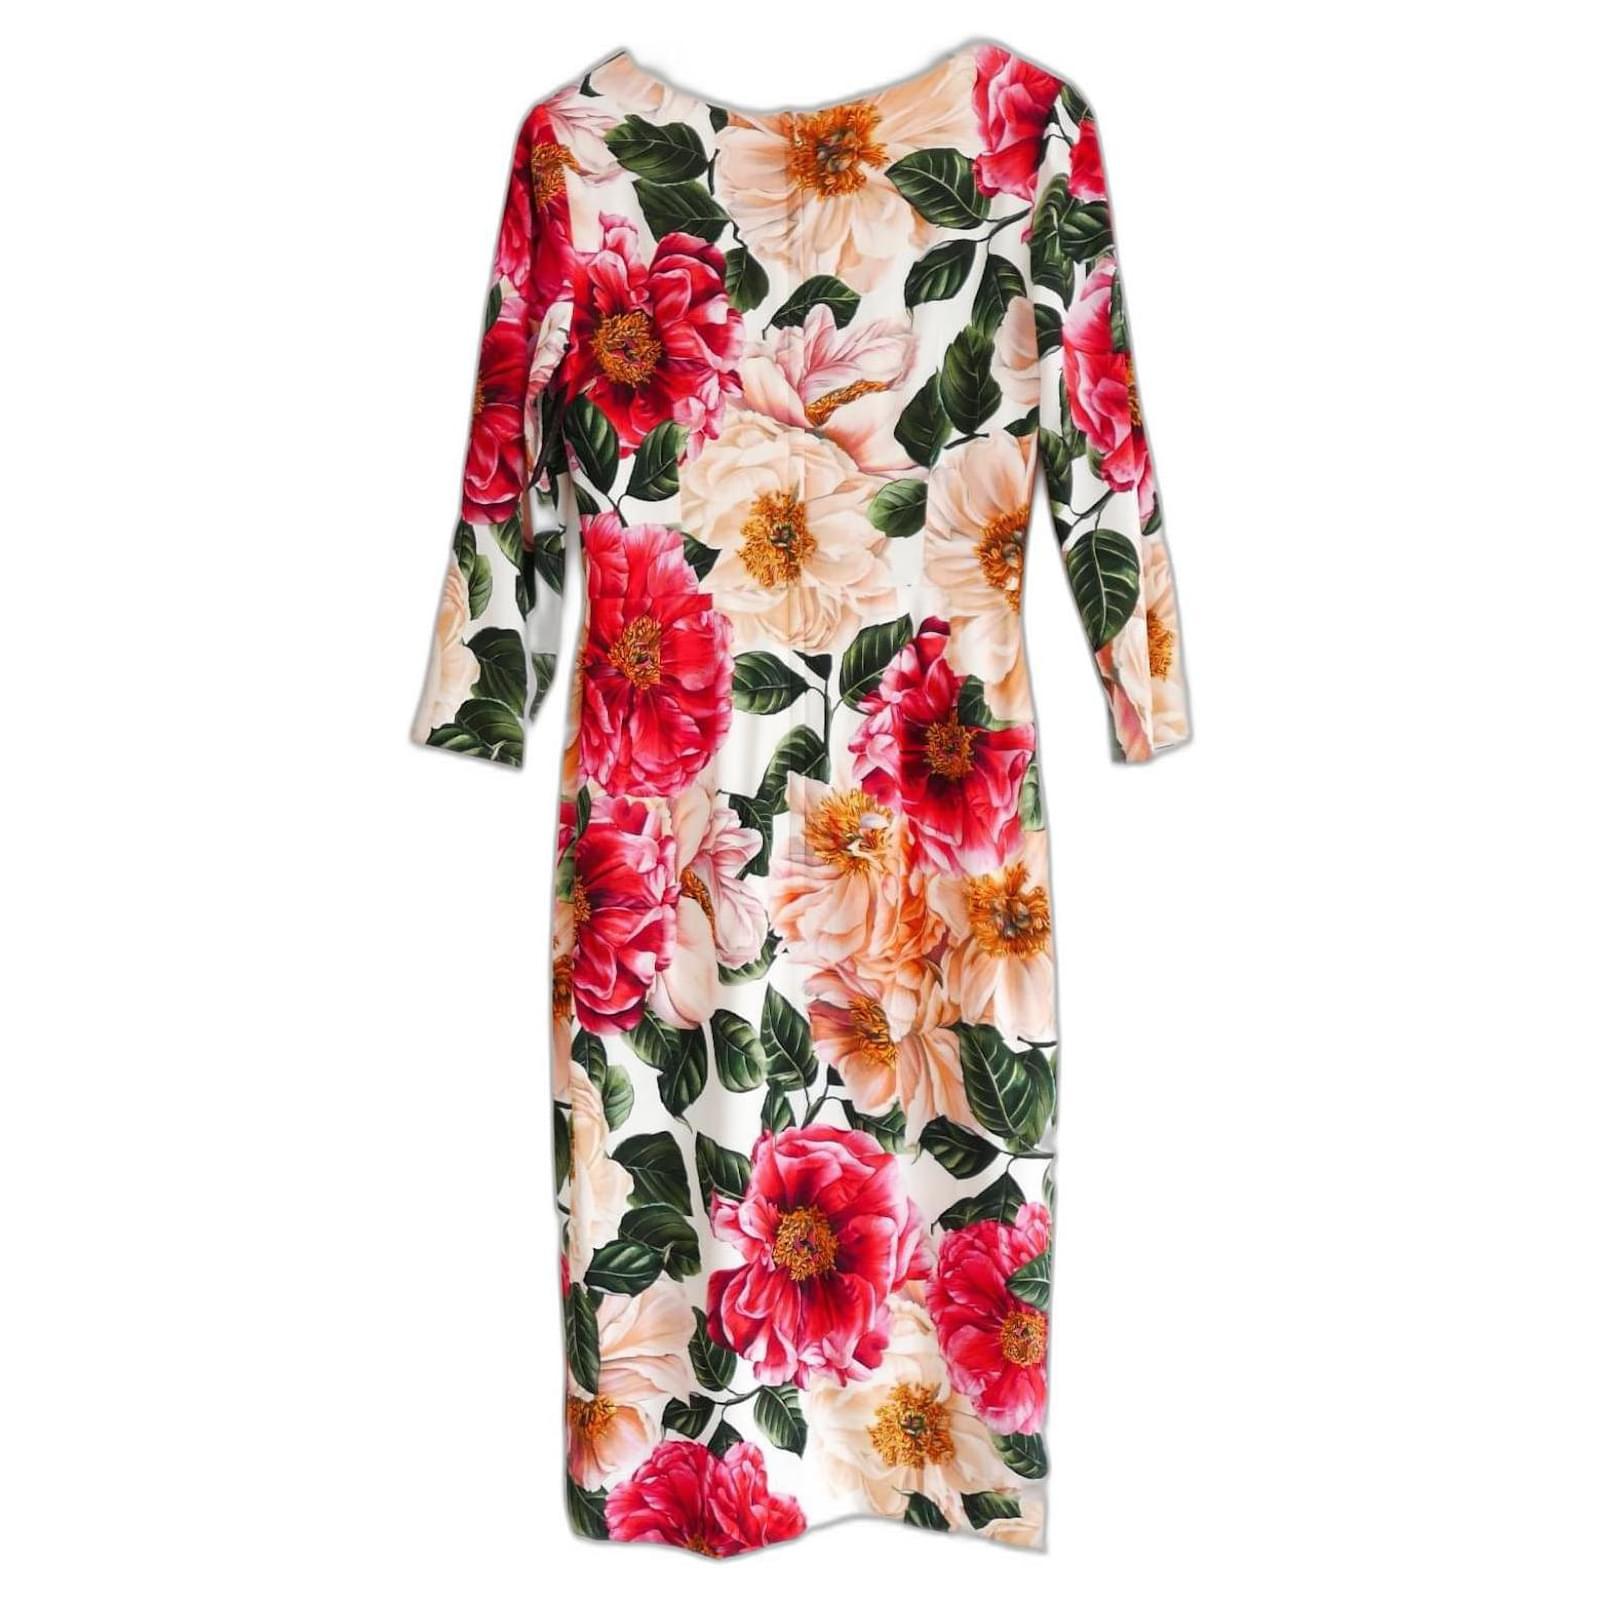 Gorgeous, ultra feminine Dolce & Gabbana rose print dress. Bought for £1850 and new with tags. Made from soft viscose/elastane crepe with a vibrant pink rose print. It has Dolce’s signature pencil cut with midi length skirt, cropped sleeves and off